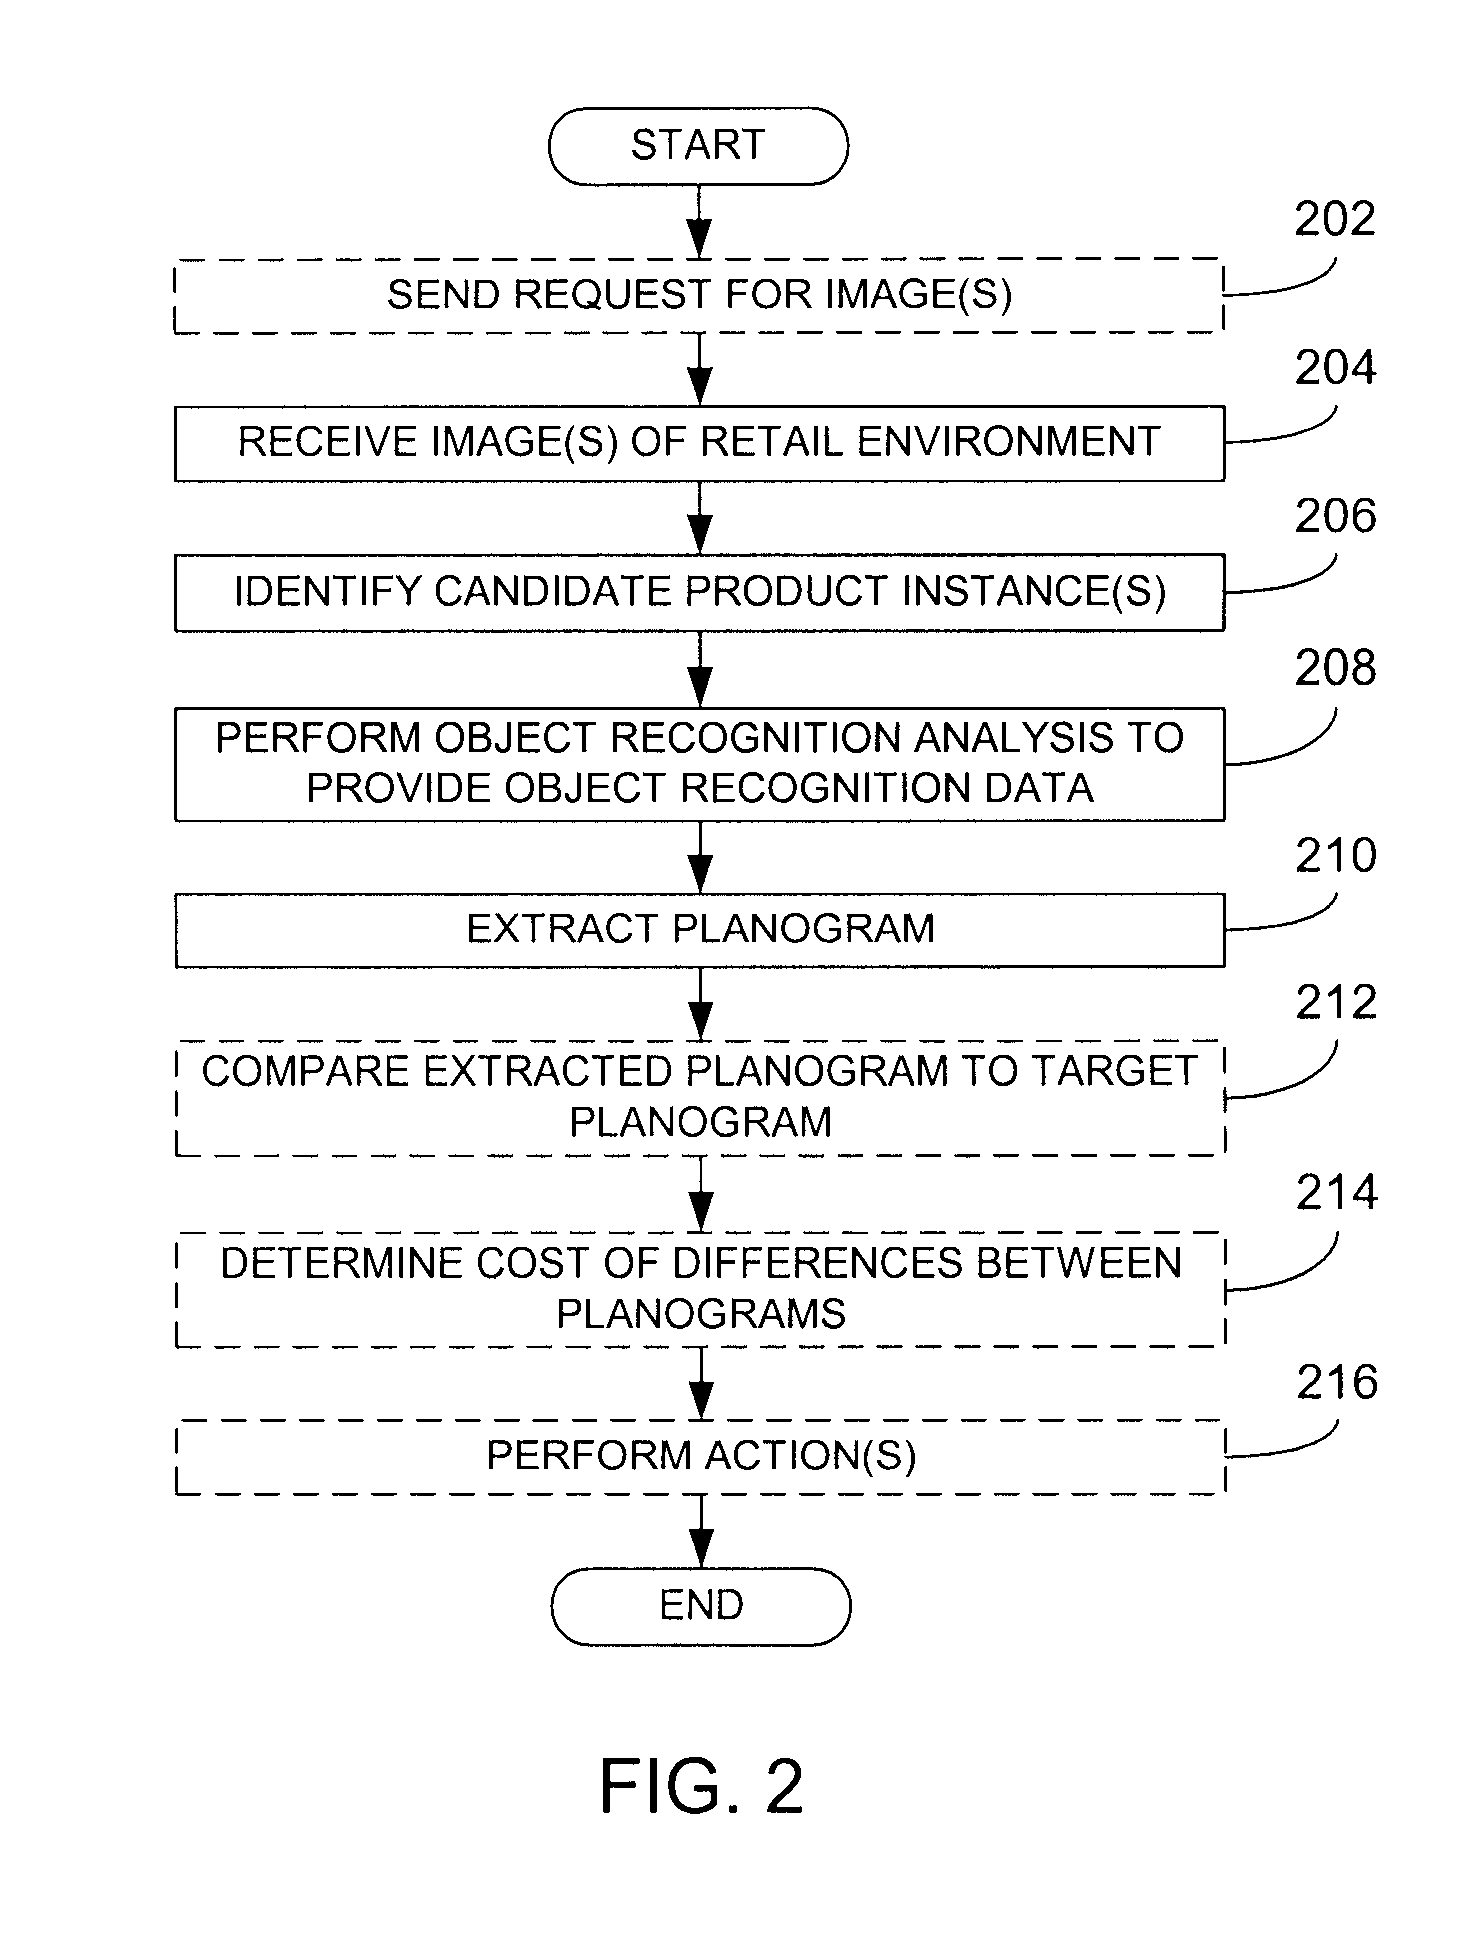 Determination Of Product Display Parameters Based On Image Processing